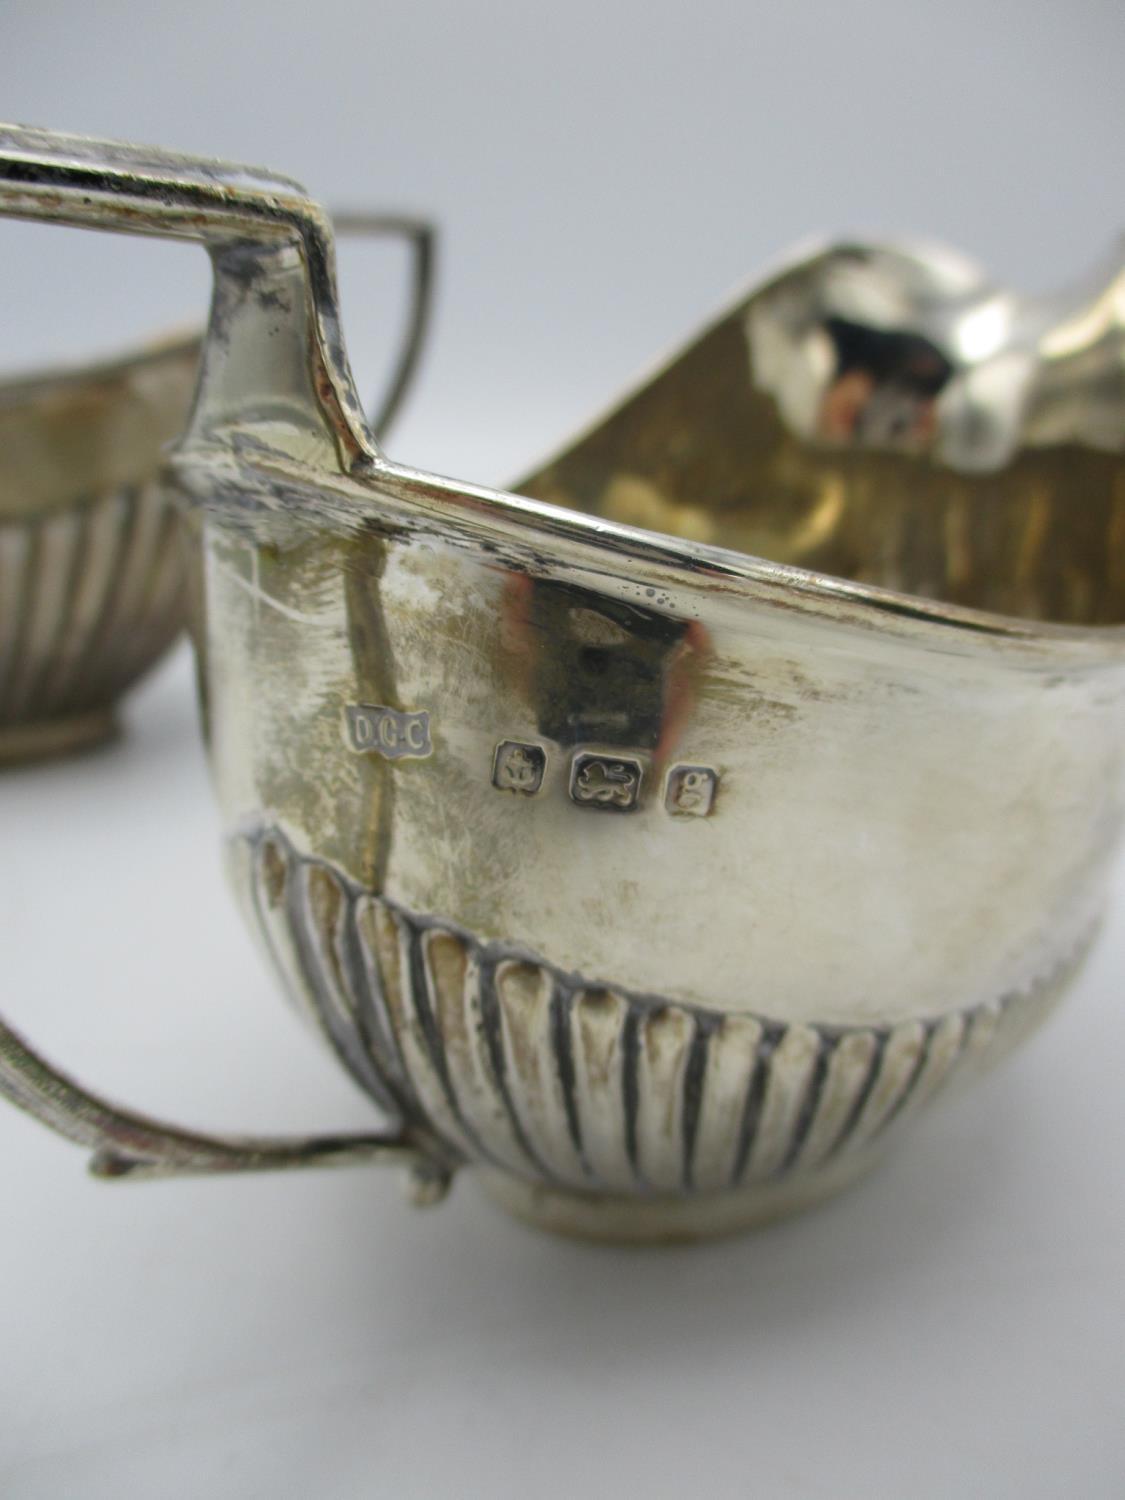 A matched pair of Edwardian silver sugar bowl and cream jug, both by Daniel George Colling, - Image 2 of 4